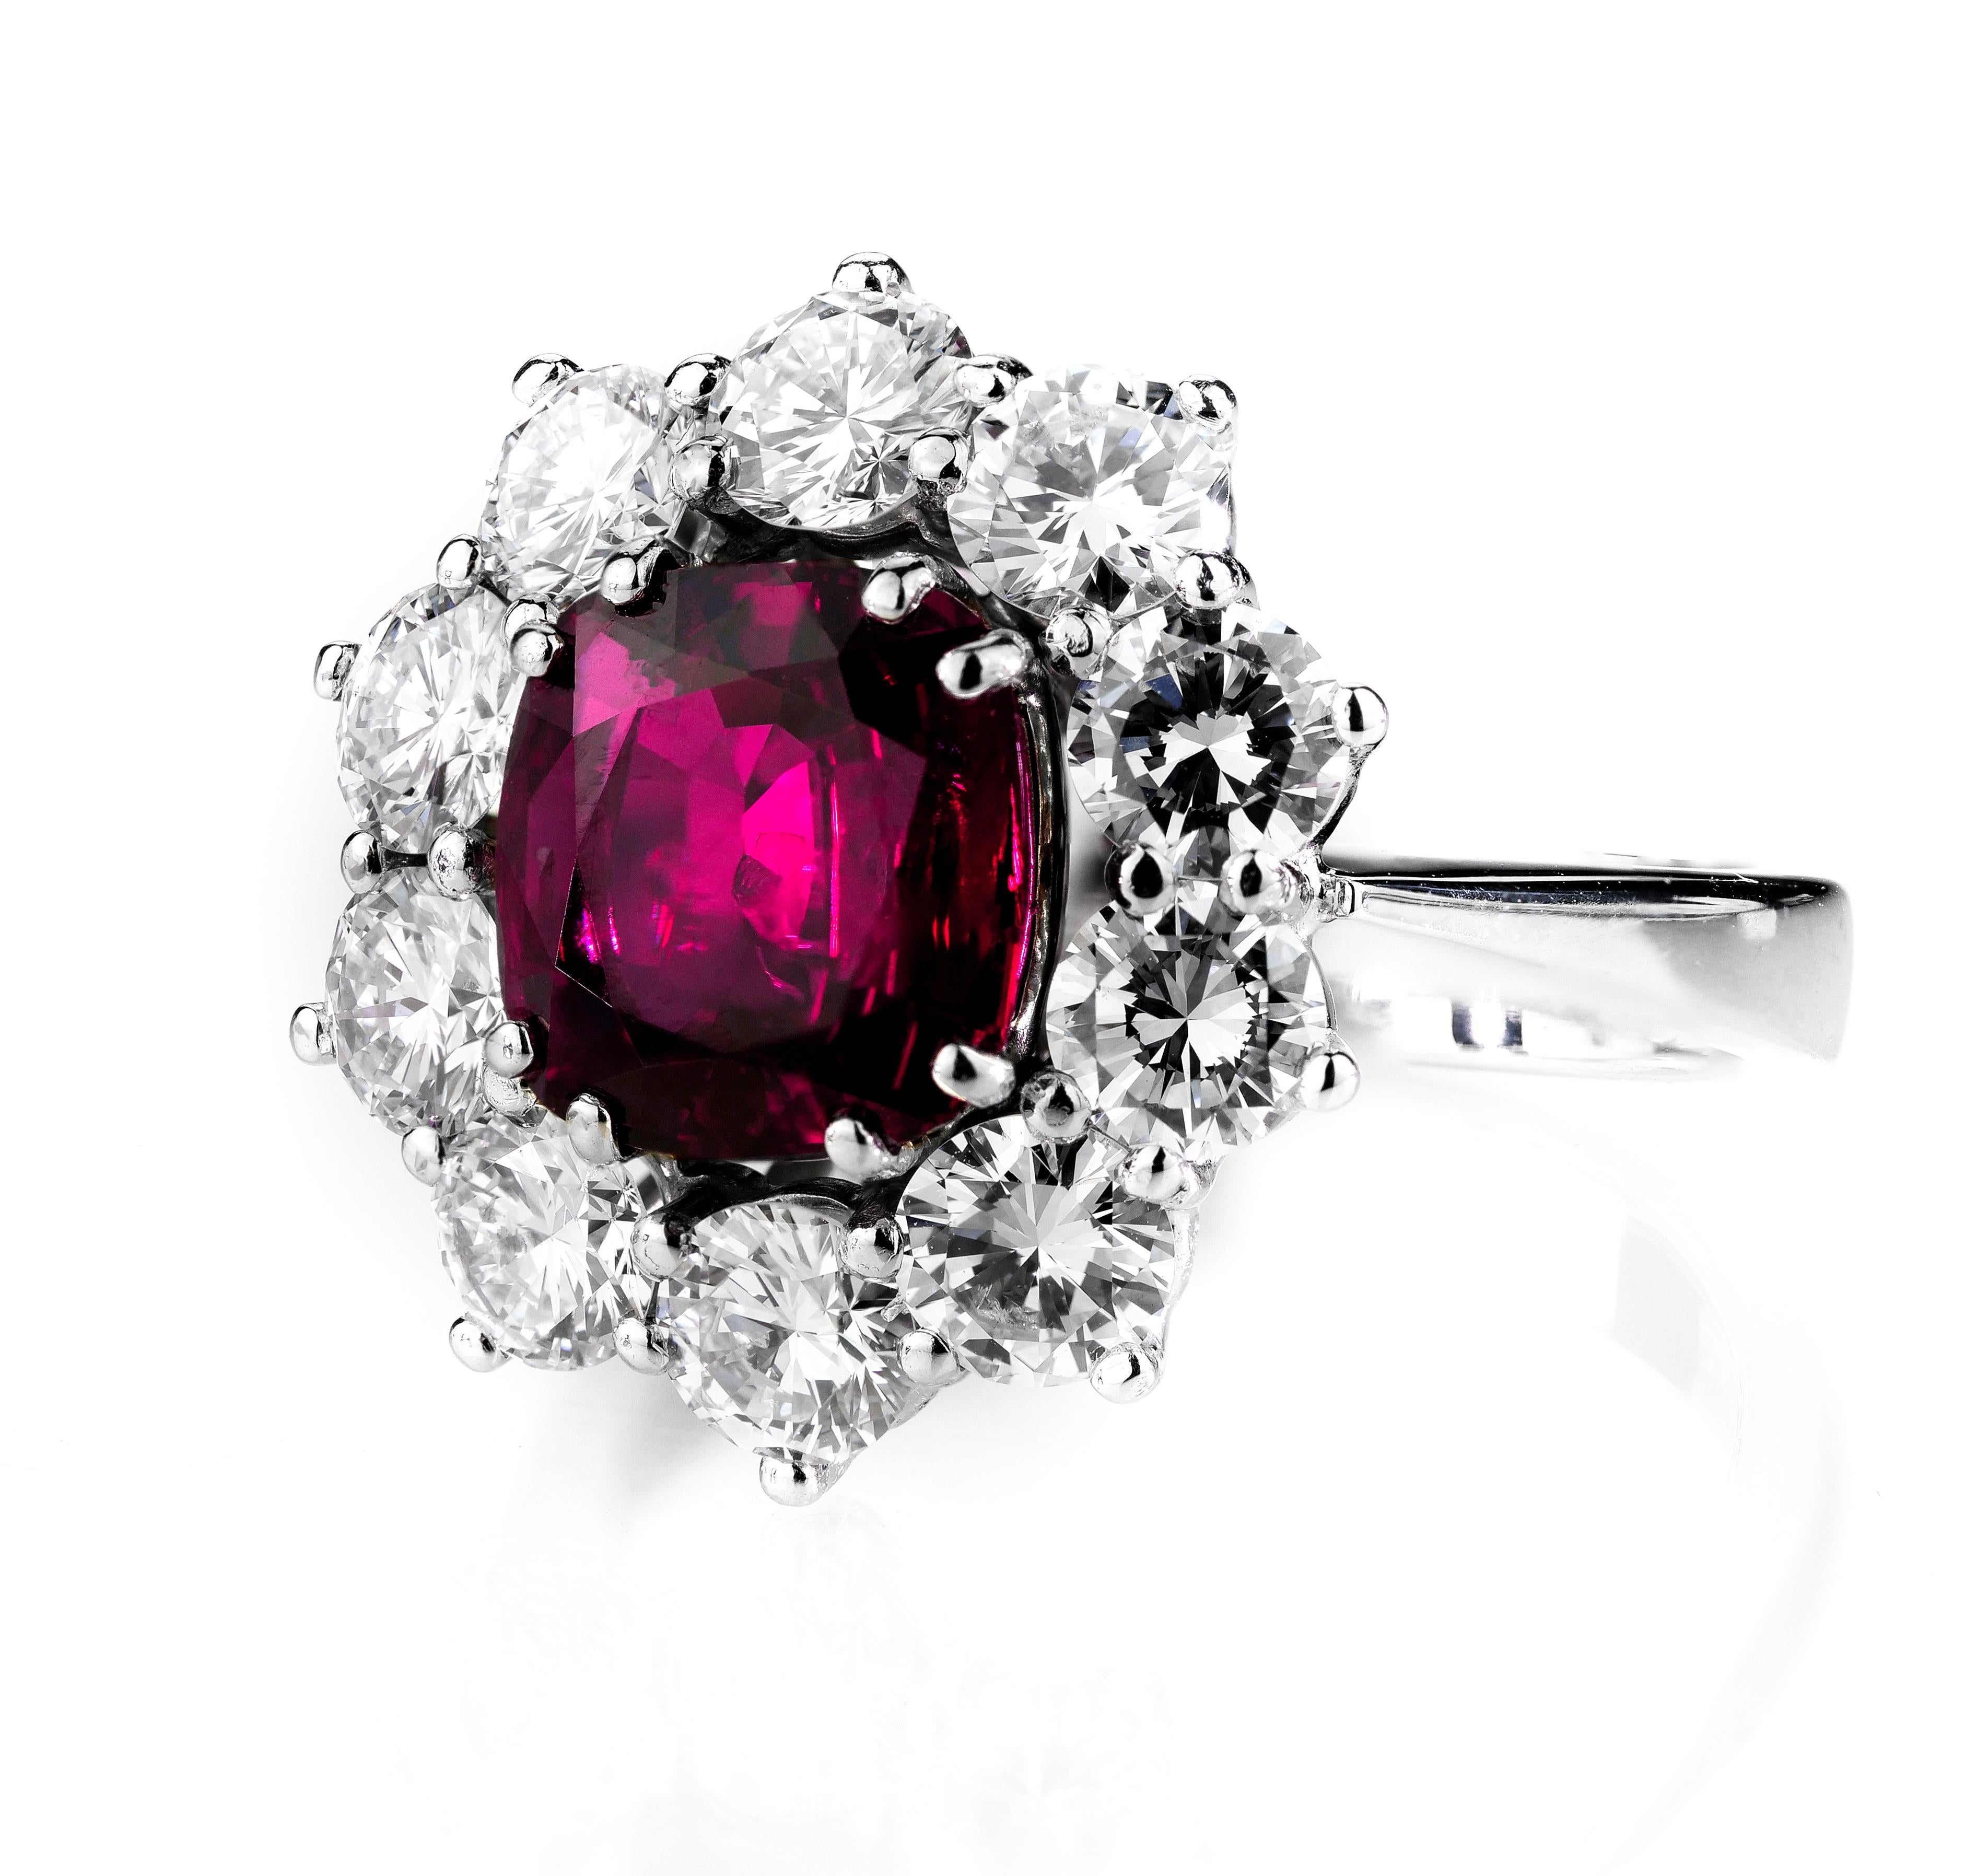 Exquisite gemstones hue of blazing ruby and cluster shining diamonds set in 18 Karat white gold. 
Ruby – widely celebrated as the most important gemstone in the world – is a once in a lifetime discovery. Effortlessly complemented by round brilliant